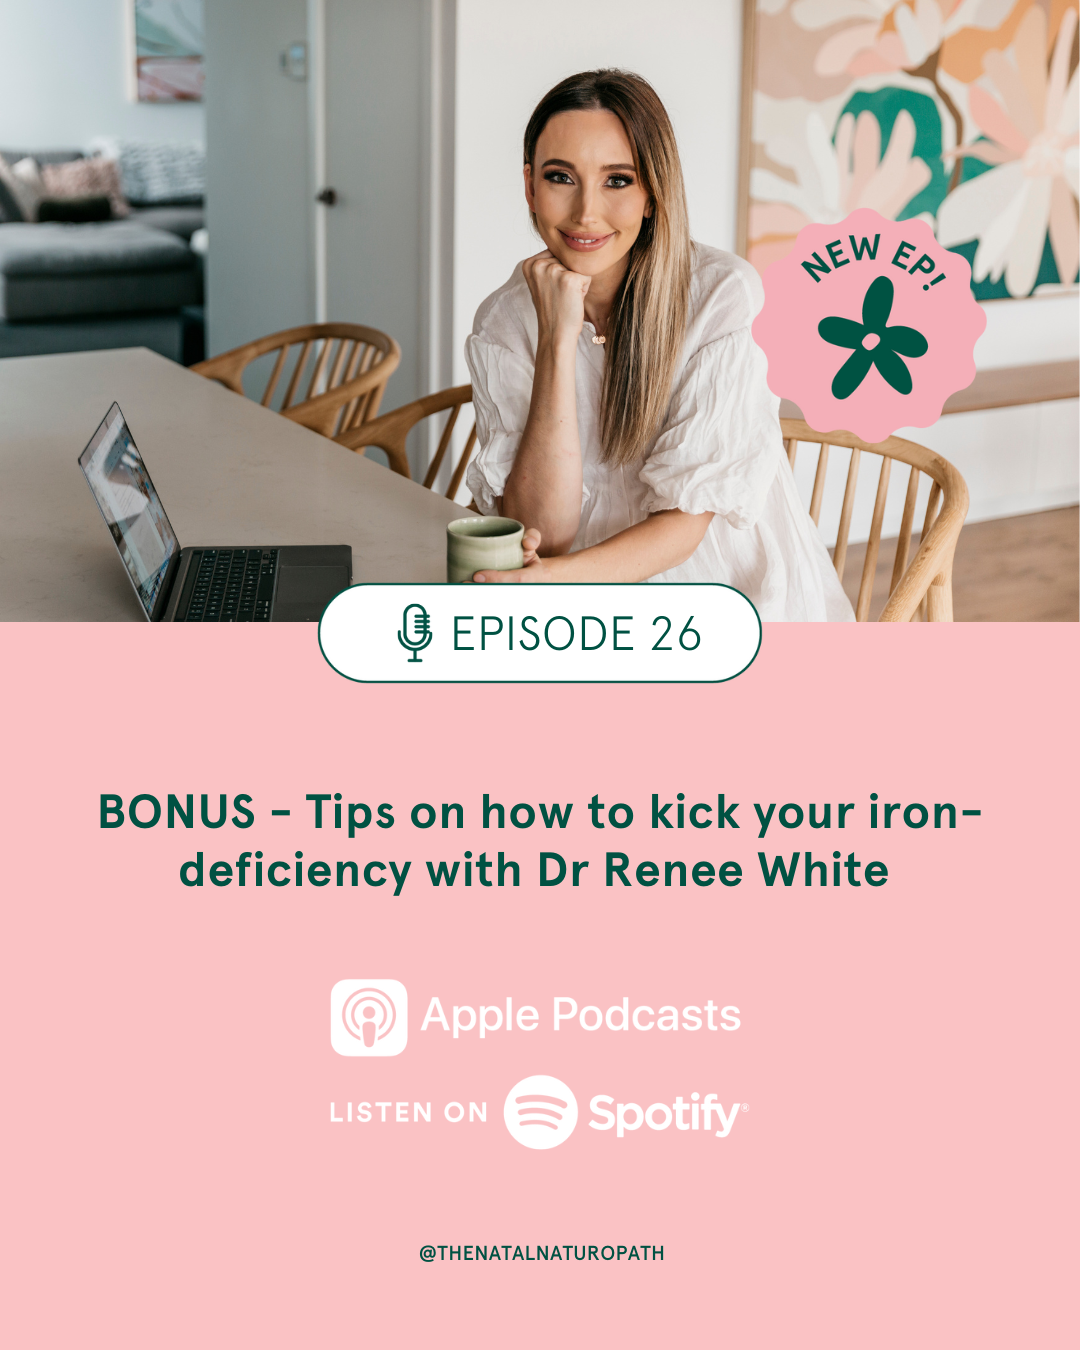 BONUS - Tips on how to kick your iron-deficiency with Dr Renee White